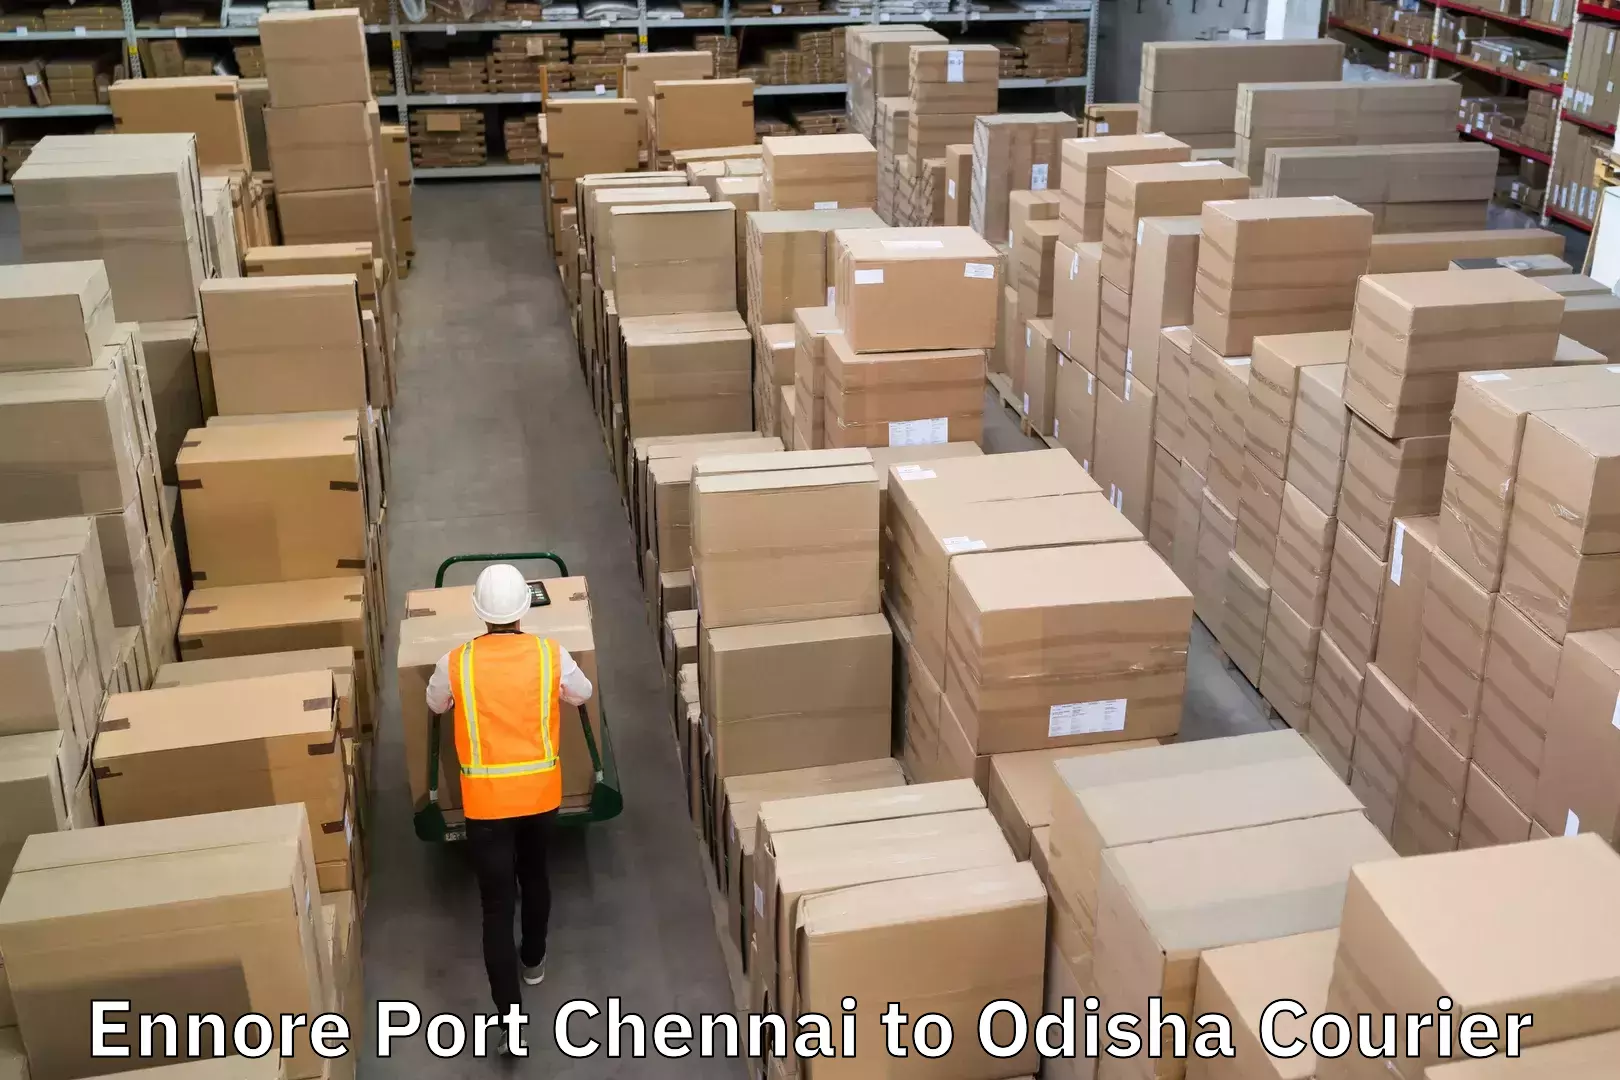 Nationwide delivery network Ennore Port Chennai to Odisha